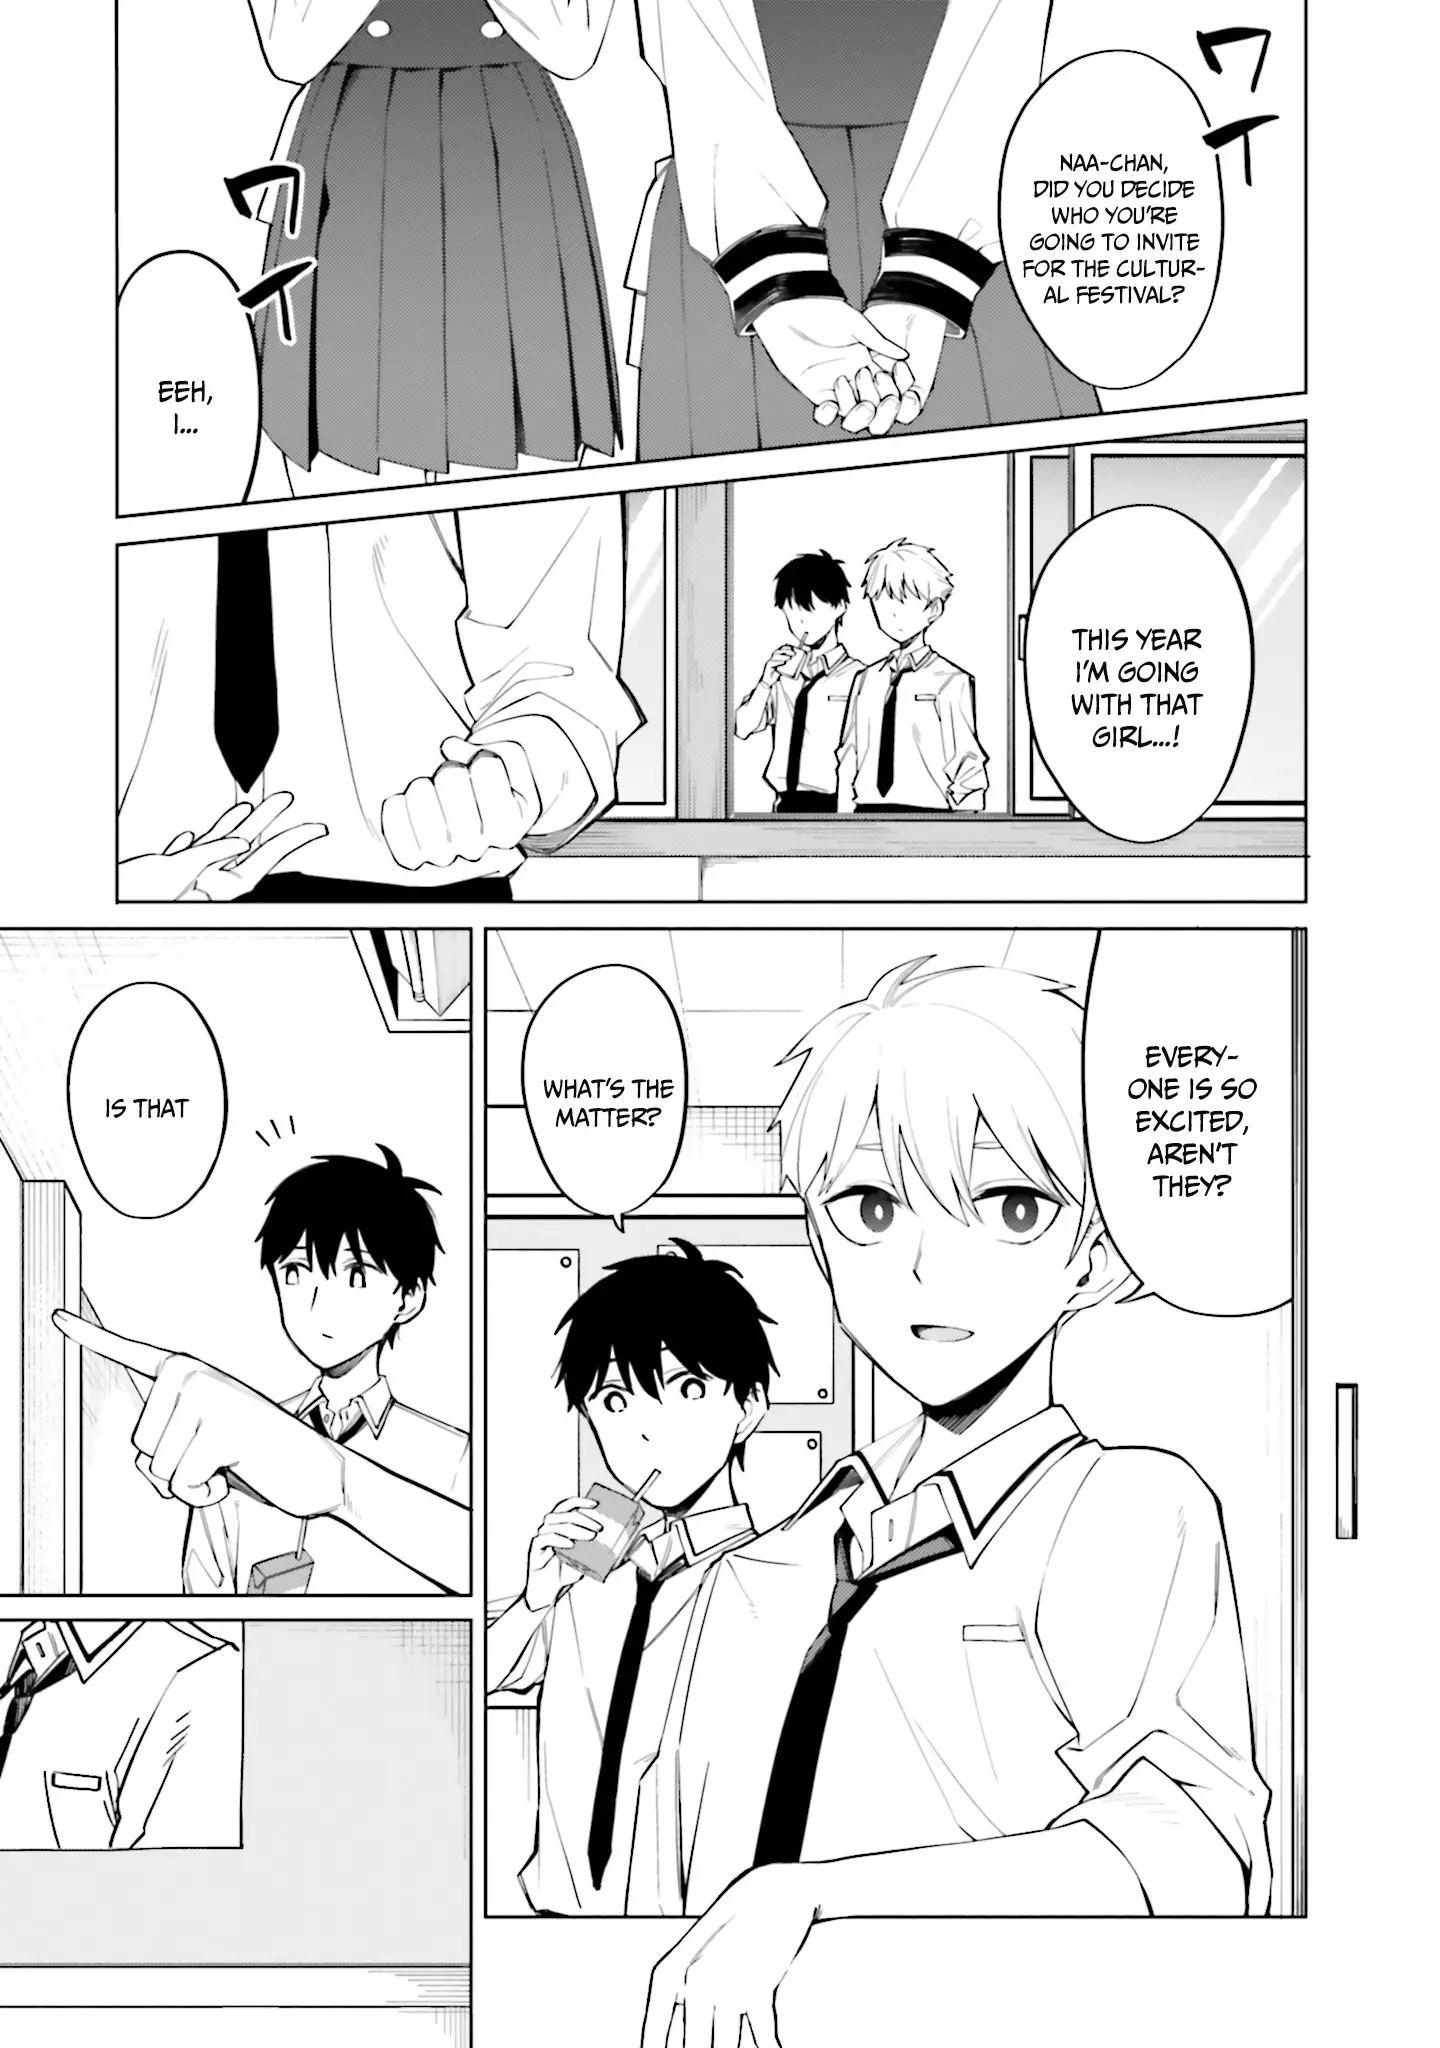 I Don't Understand Shirogane-San's Facial Expression At All - 13 page 10-c4ed3e60